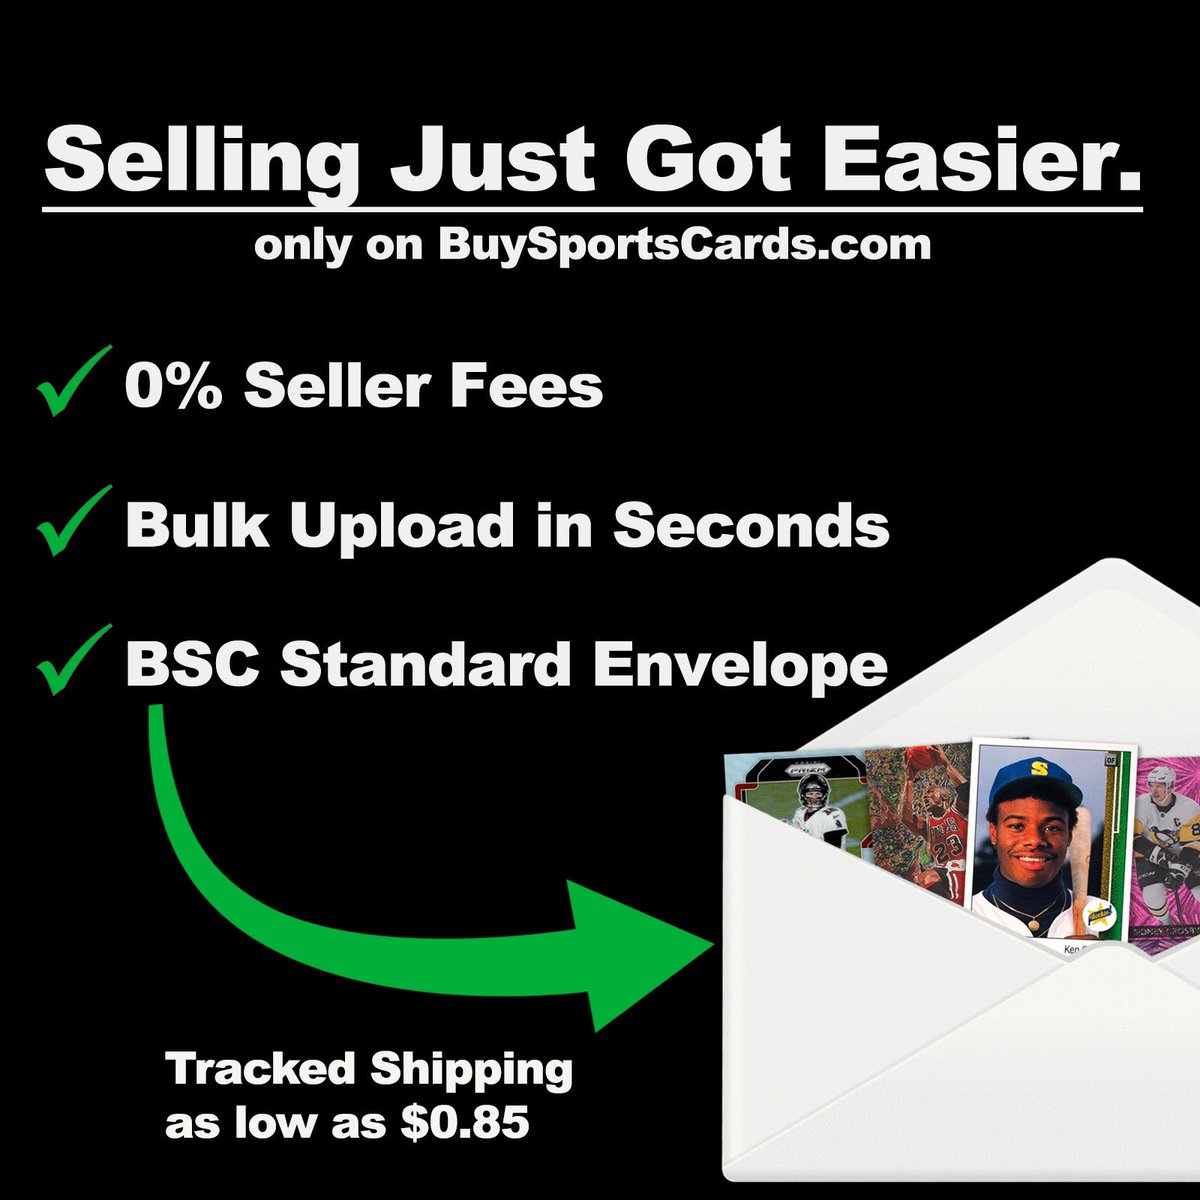 Collectors are waiting…start selling to them on BuySportsCards.com 😃 #TheHobby #SportsCards